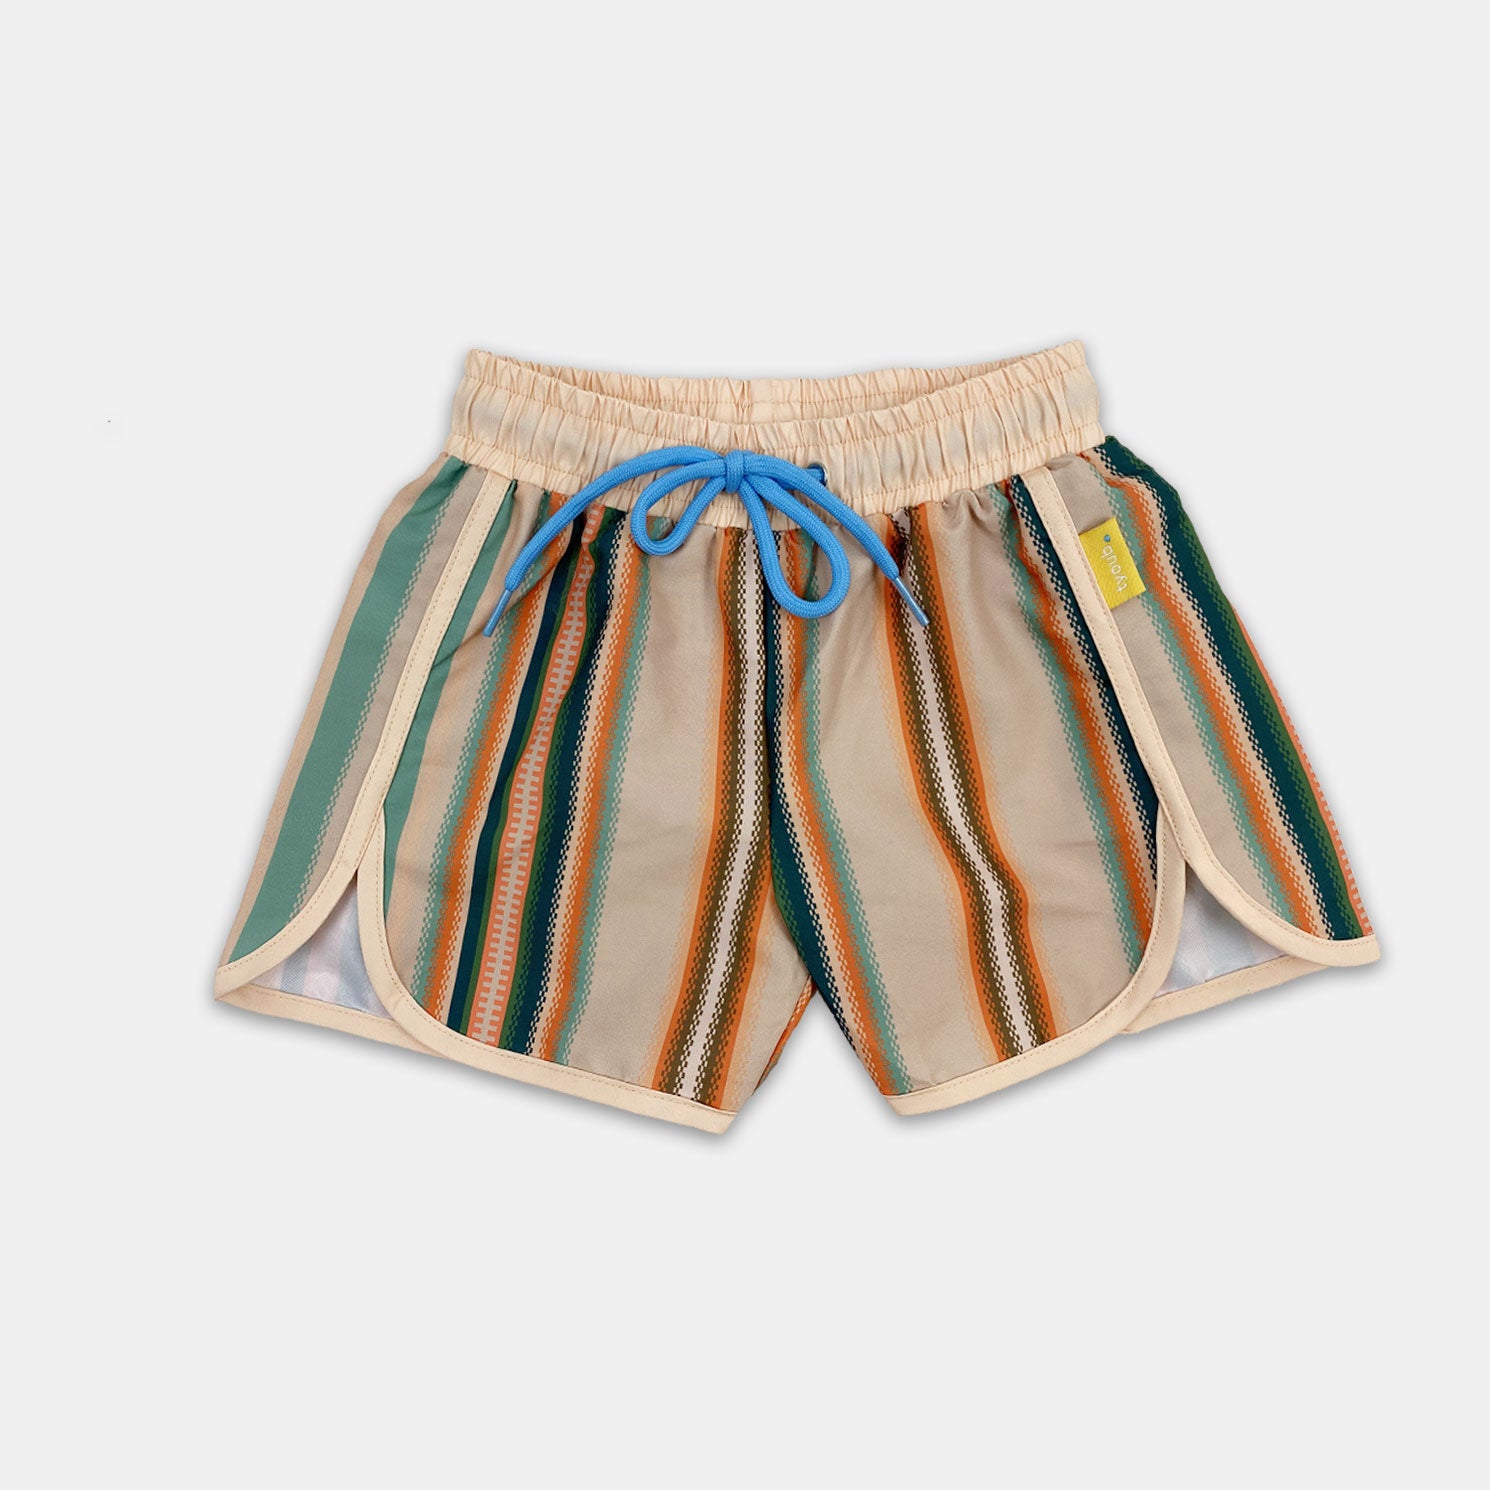 Swim and sports shorts, wide elasticated waistband and functional drawcord. Board shorts with contrast trim, short length unlined with high sun protection. Regular fit swim shorts.